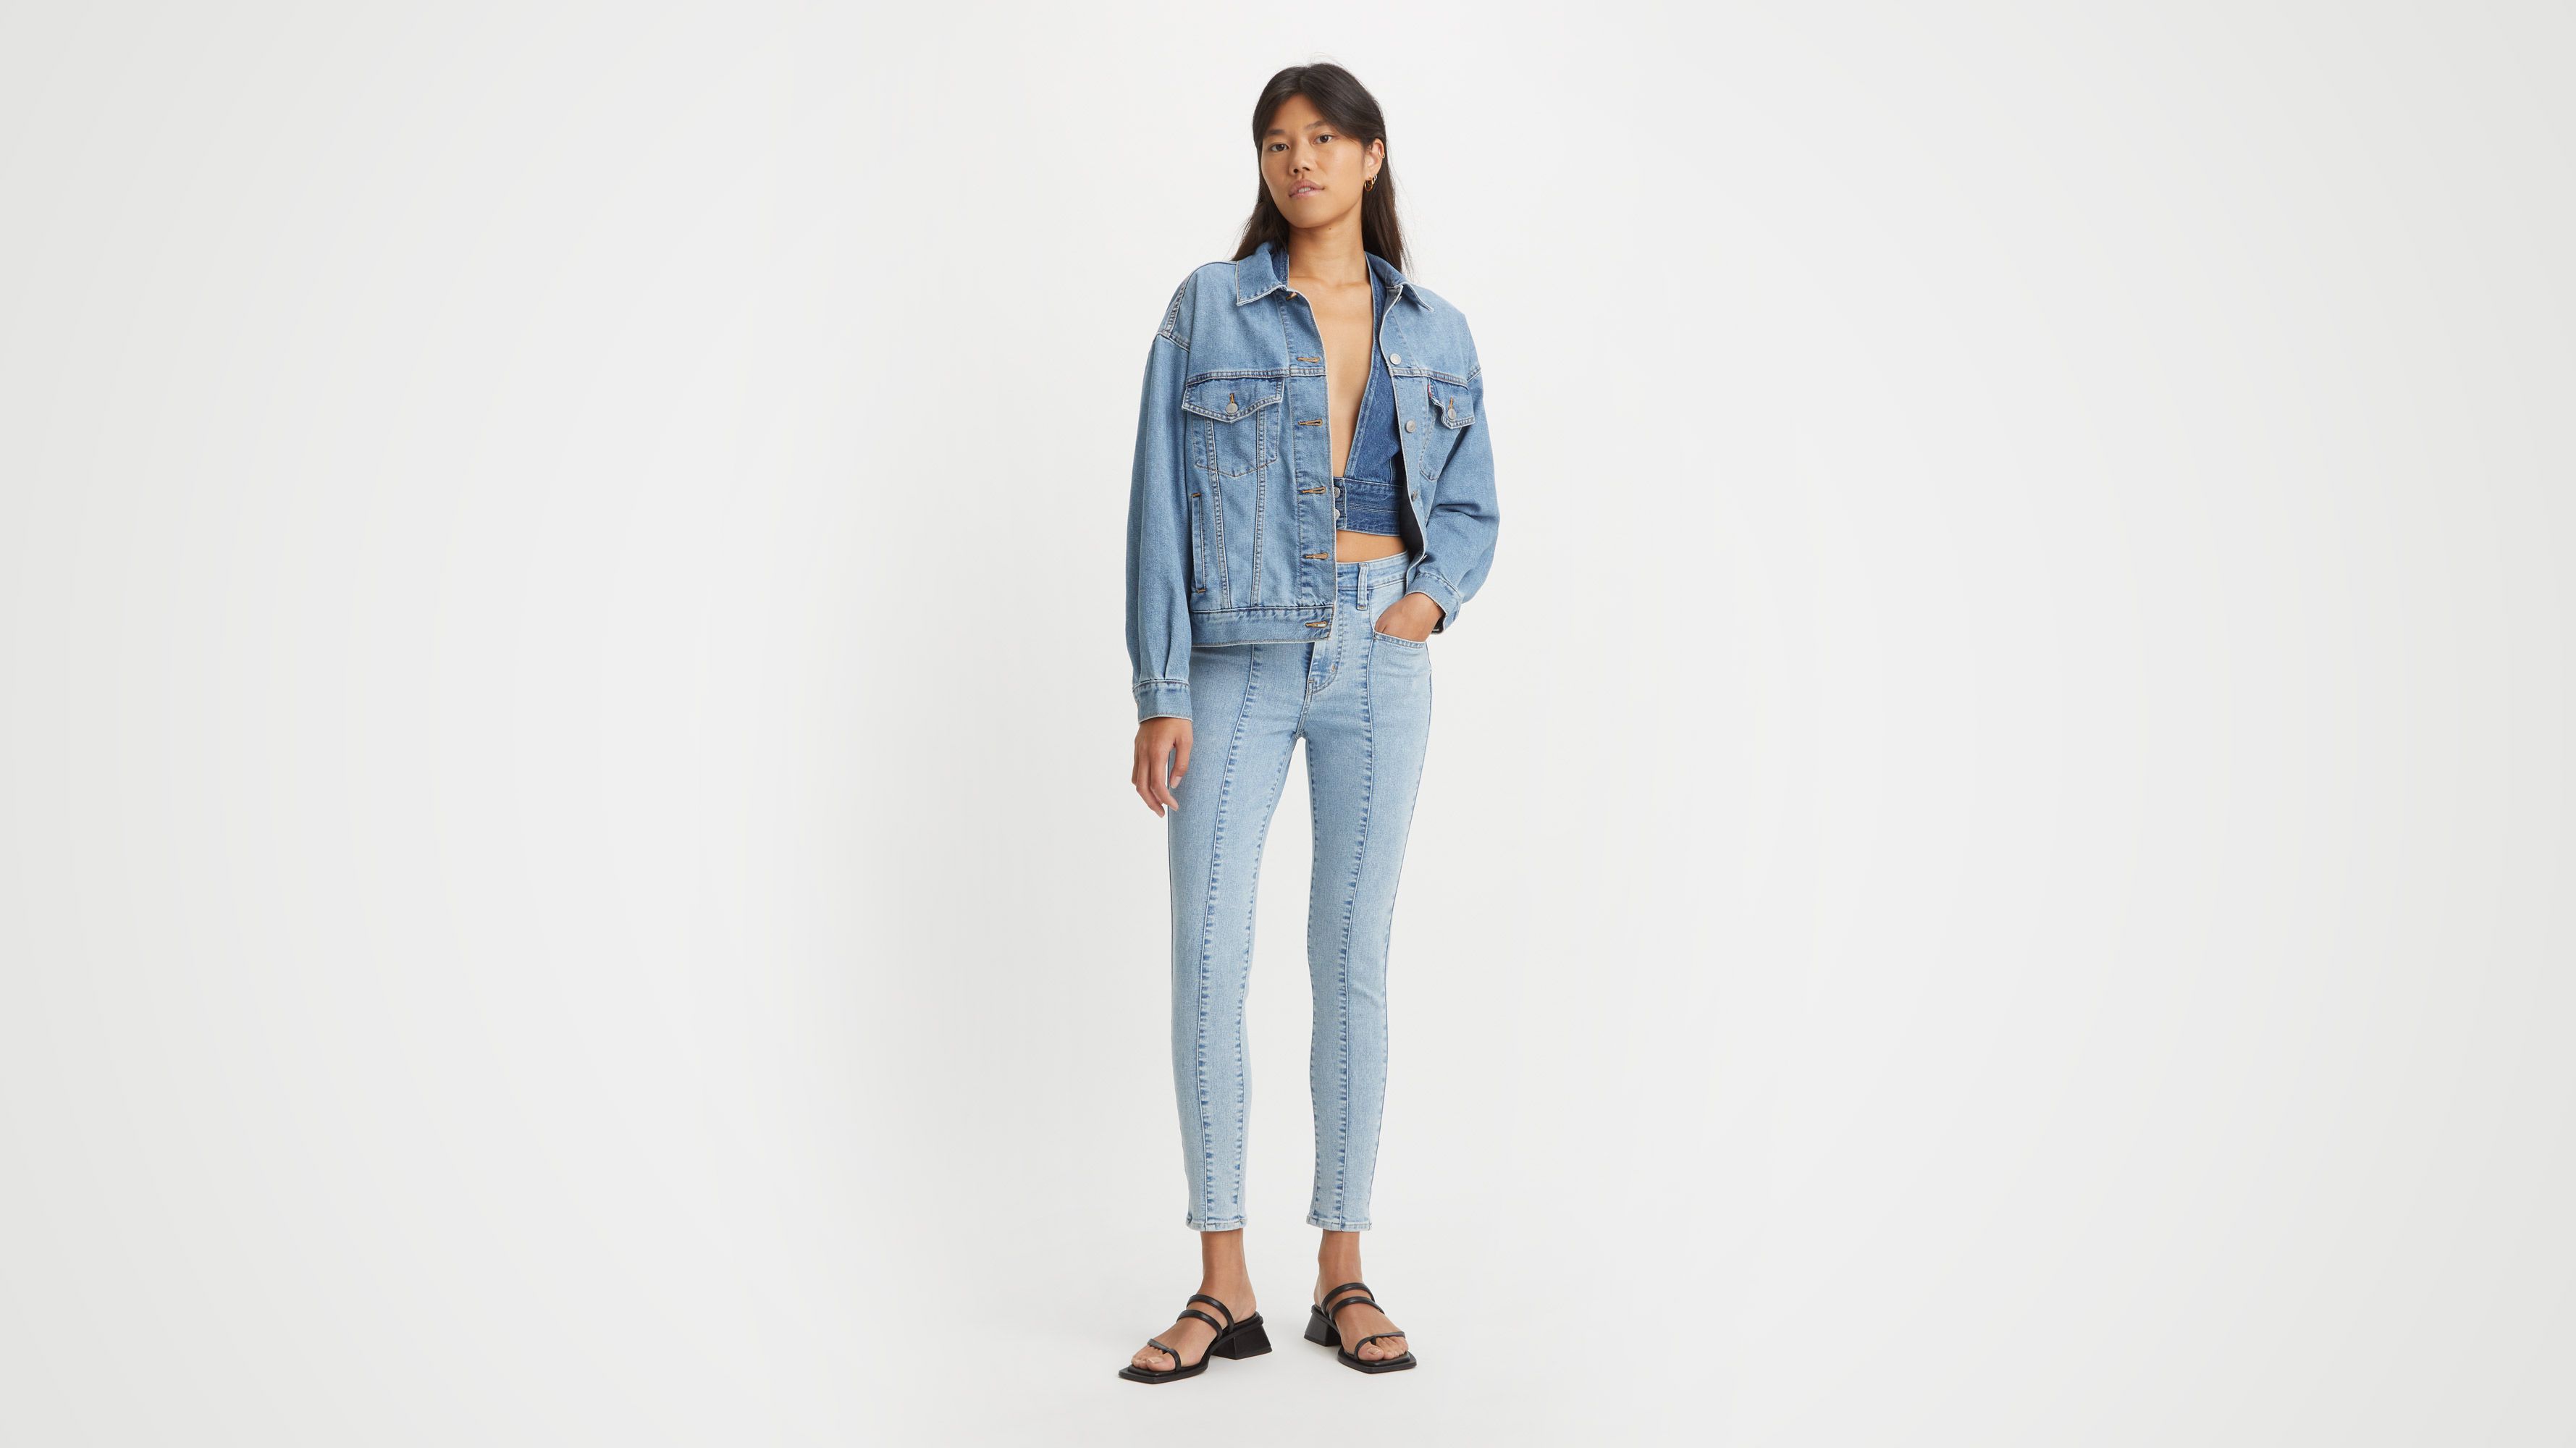 721 Recrafted Women's Jeans - Light Wash | Levi's® US